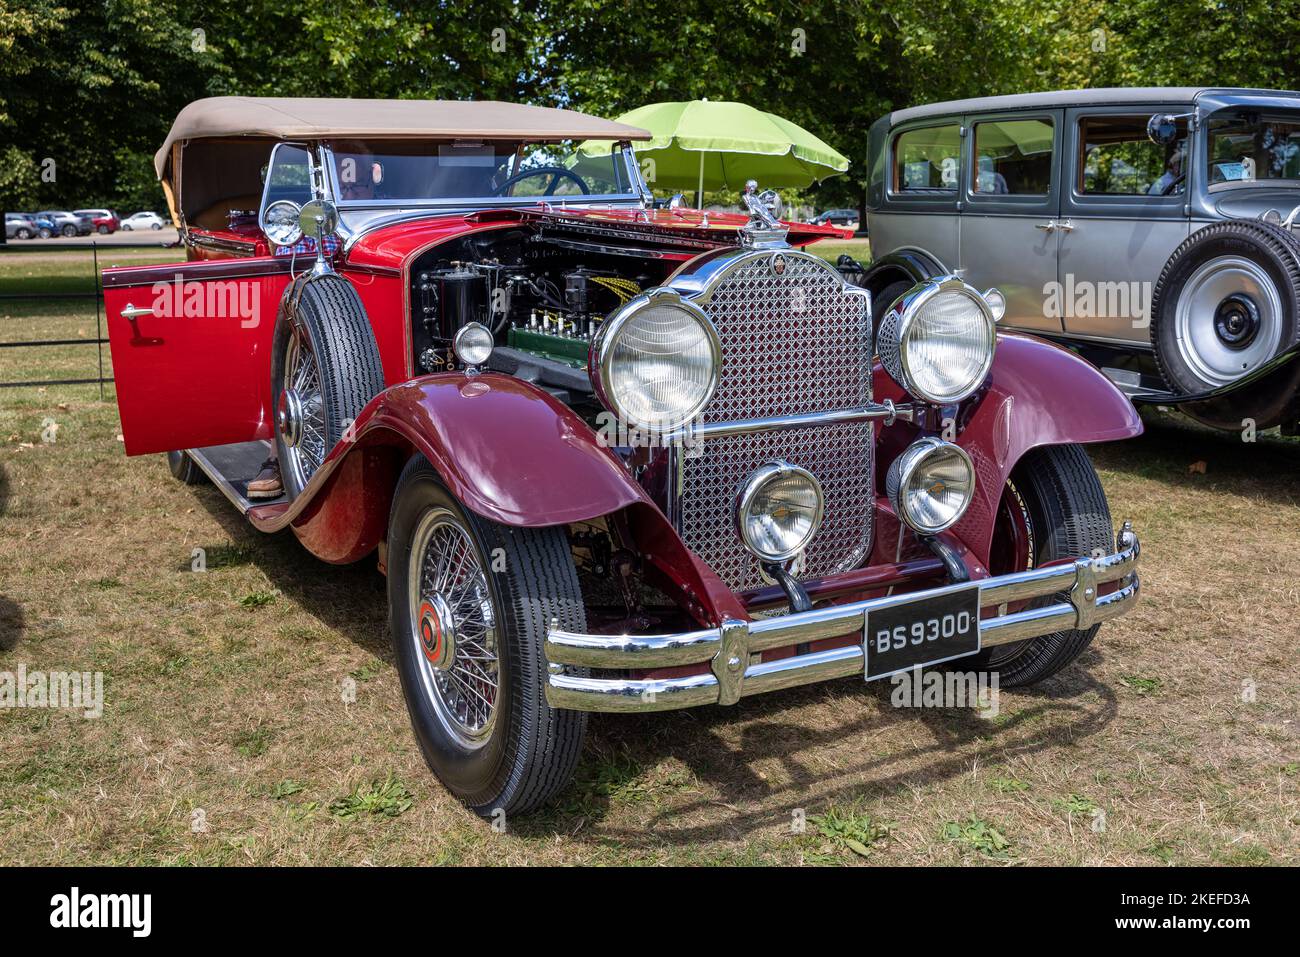 1930 Packard 745 Deluxe Eight ‘BS 9300’ on display at the American Auto Club Rally of the Giants, held at Blenheim Palace on the 10th July 2022 Stock Photo